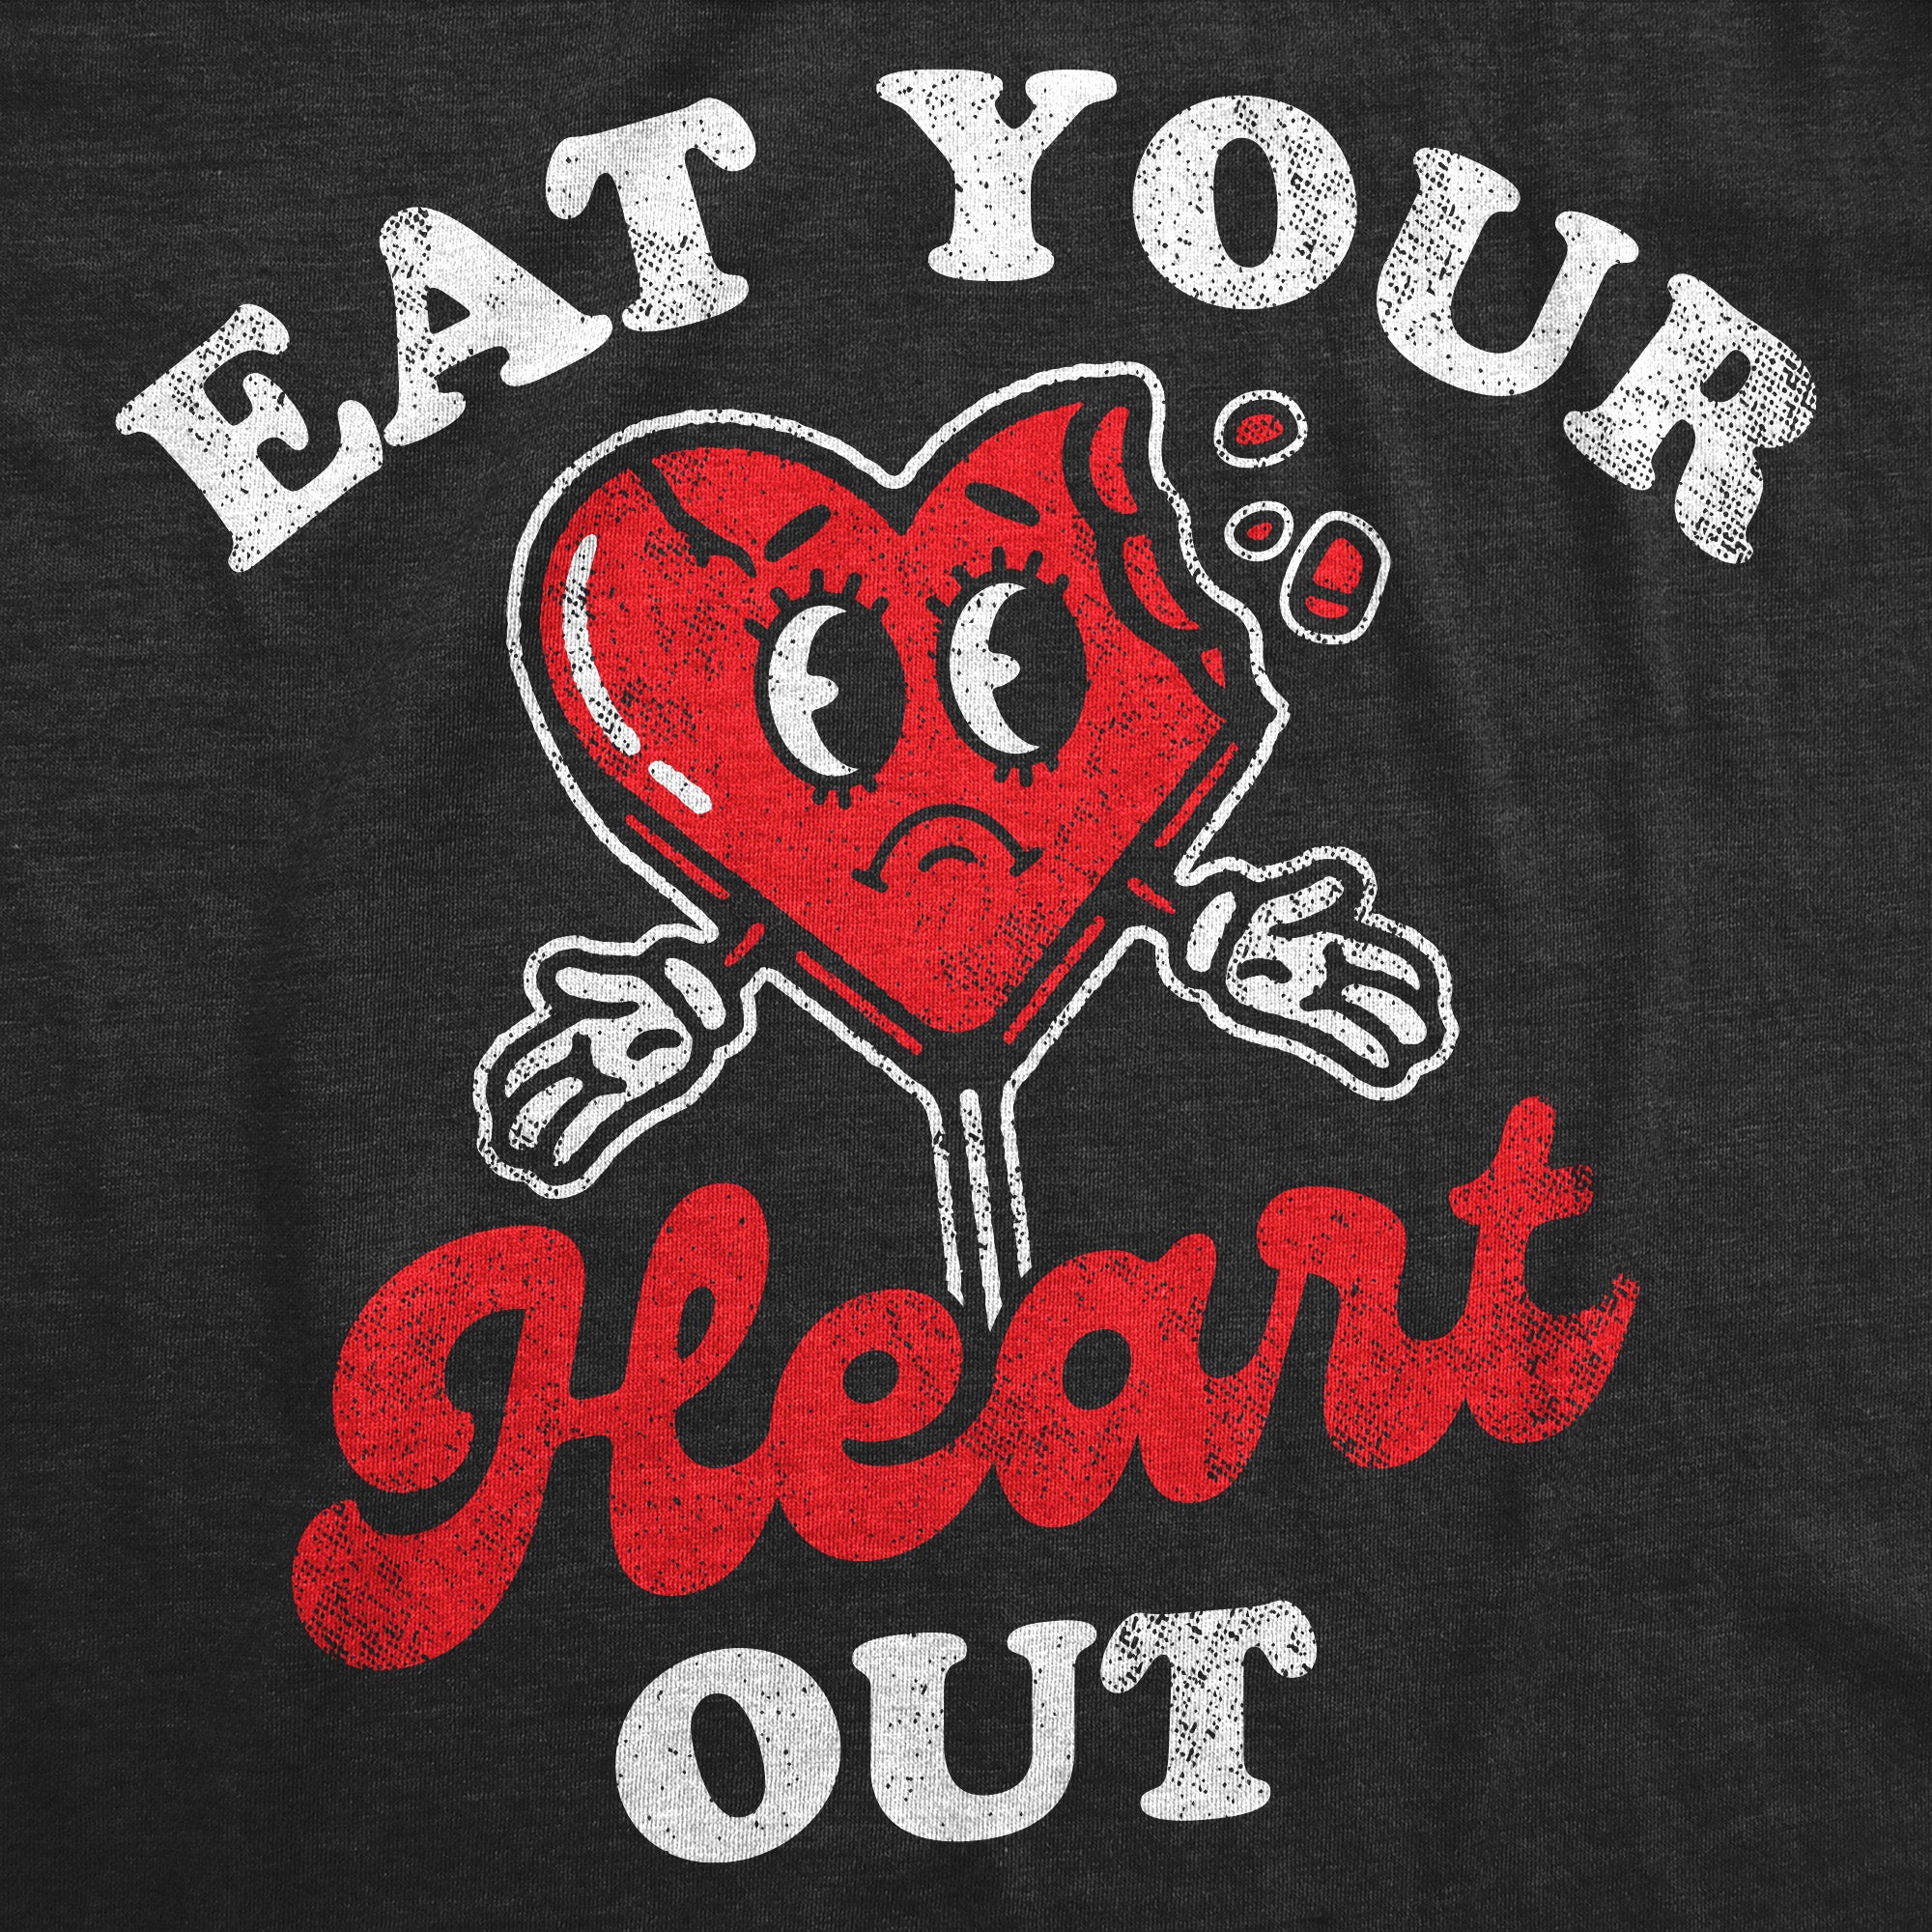 Funny Heather Black - Eat Your Heart Out Eat Your Heart Out Womens T Shirt Nerdy Valentine's Day Tee